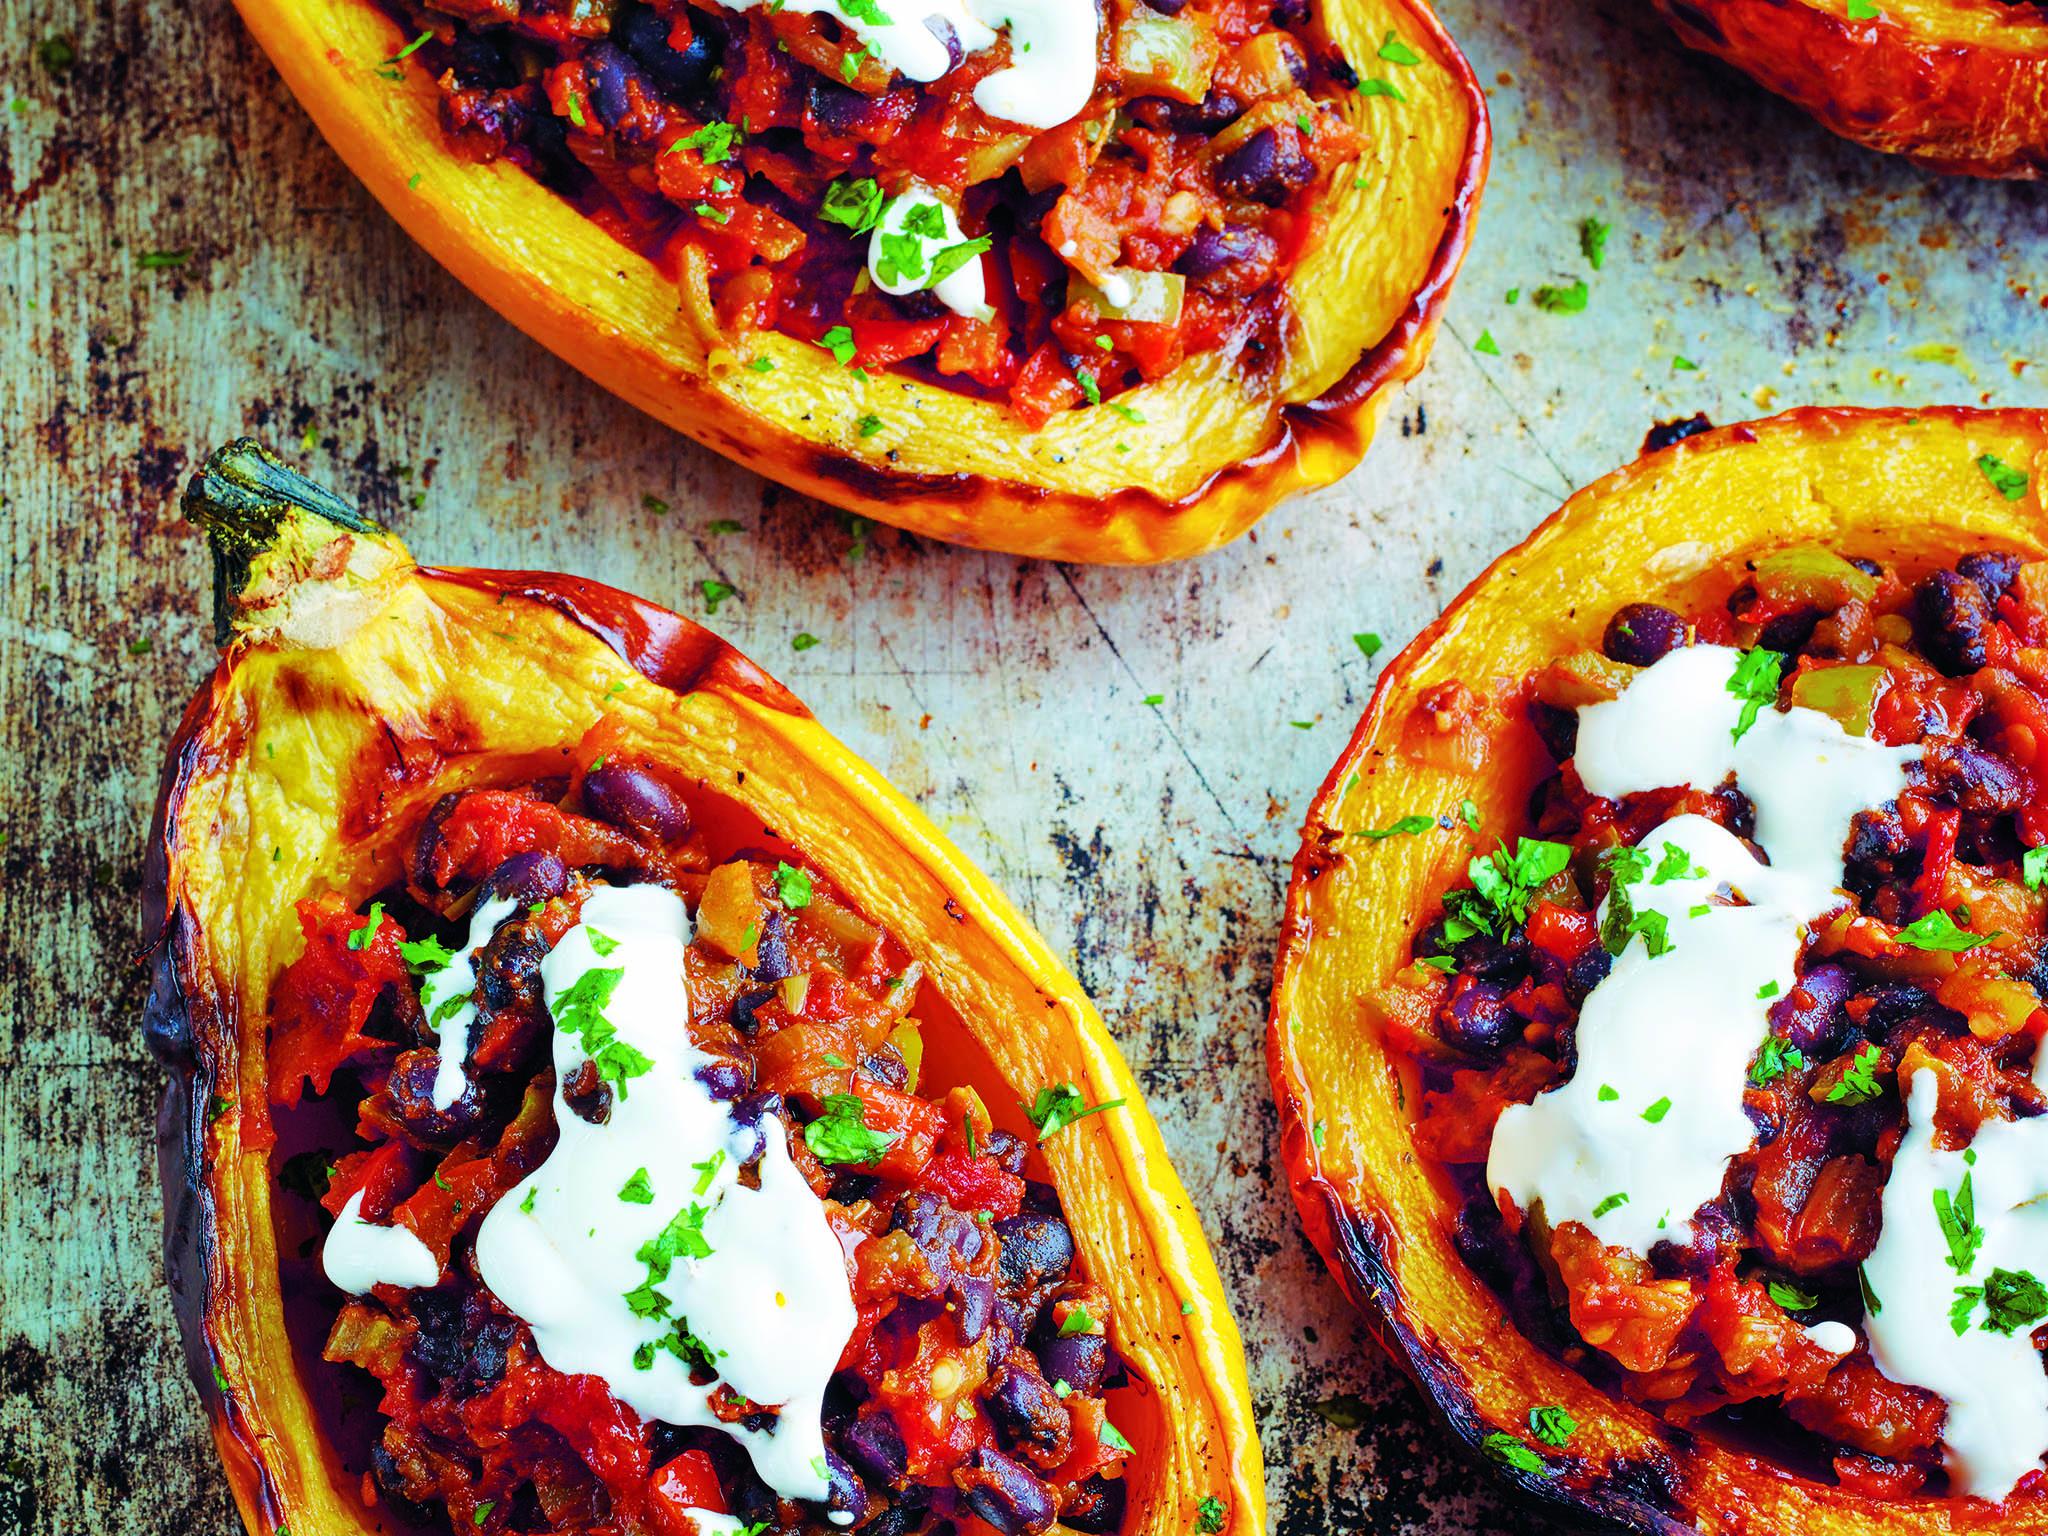 This dish opens up a world of serving suggestions, including stuffed in a squash